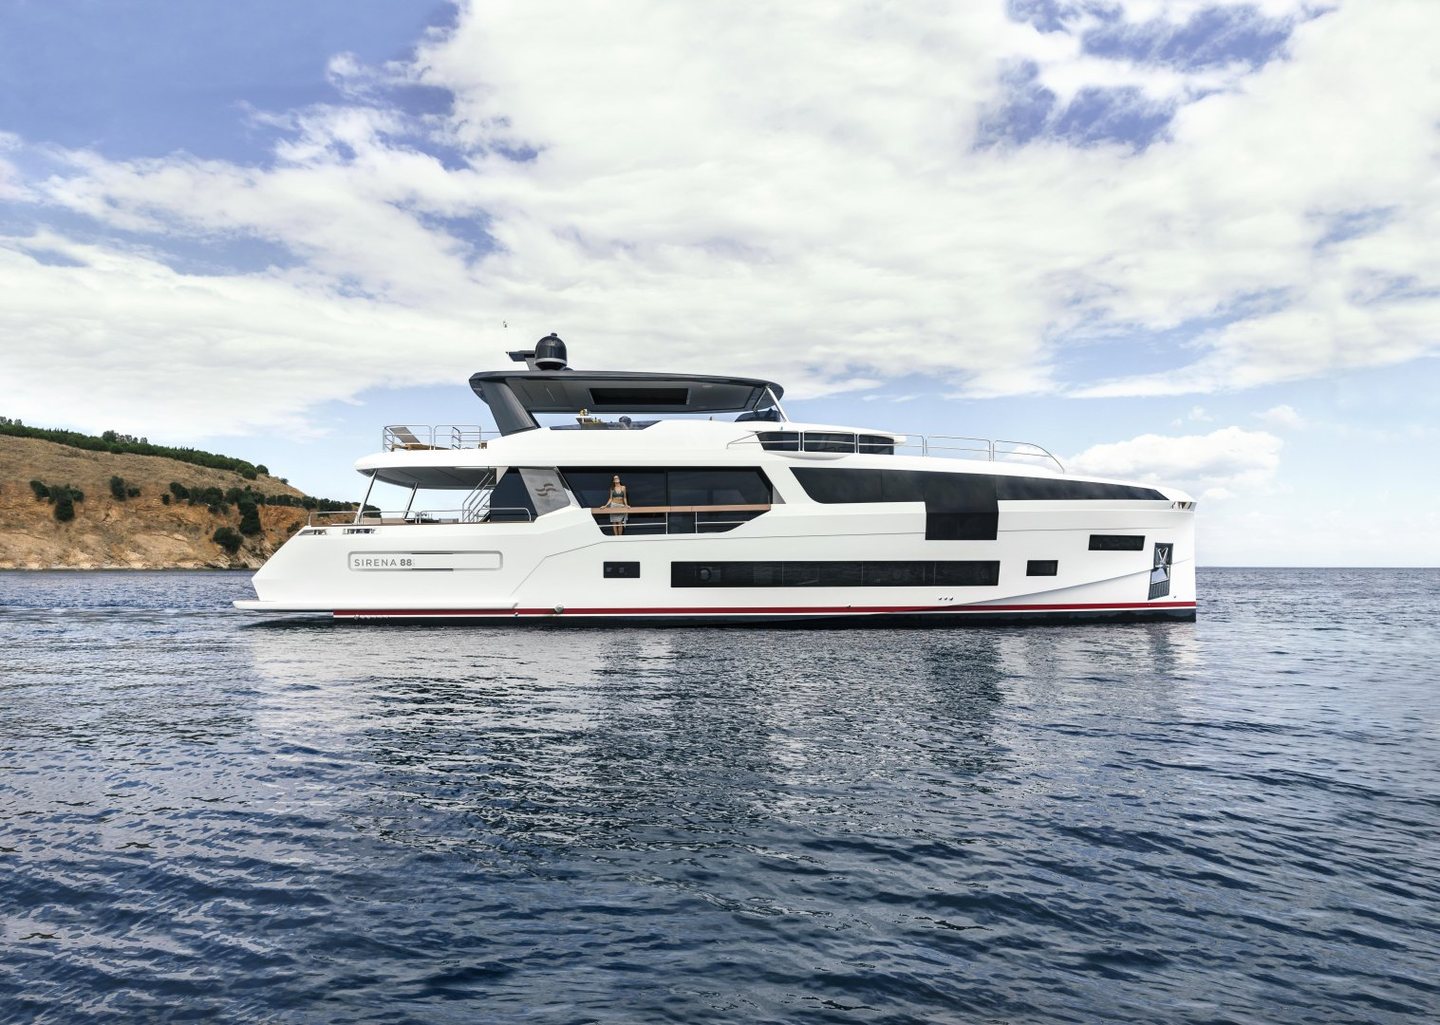 360 VR Virtual Tours of the Sirena 88